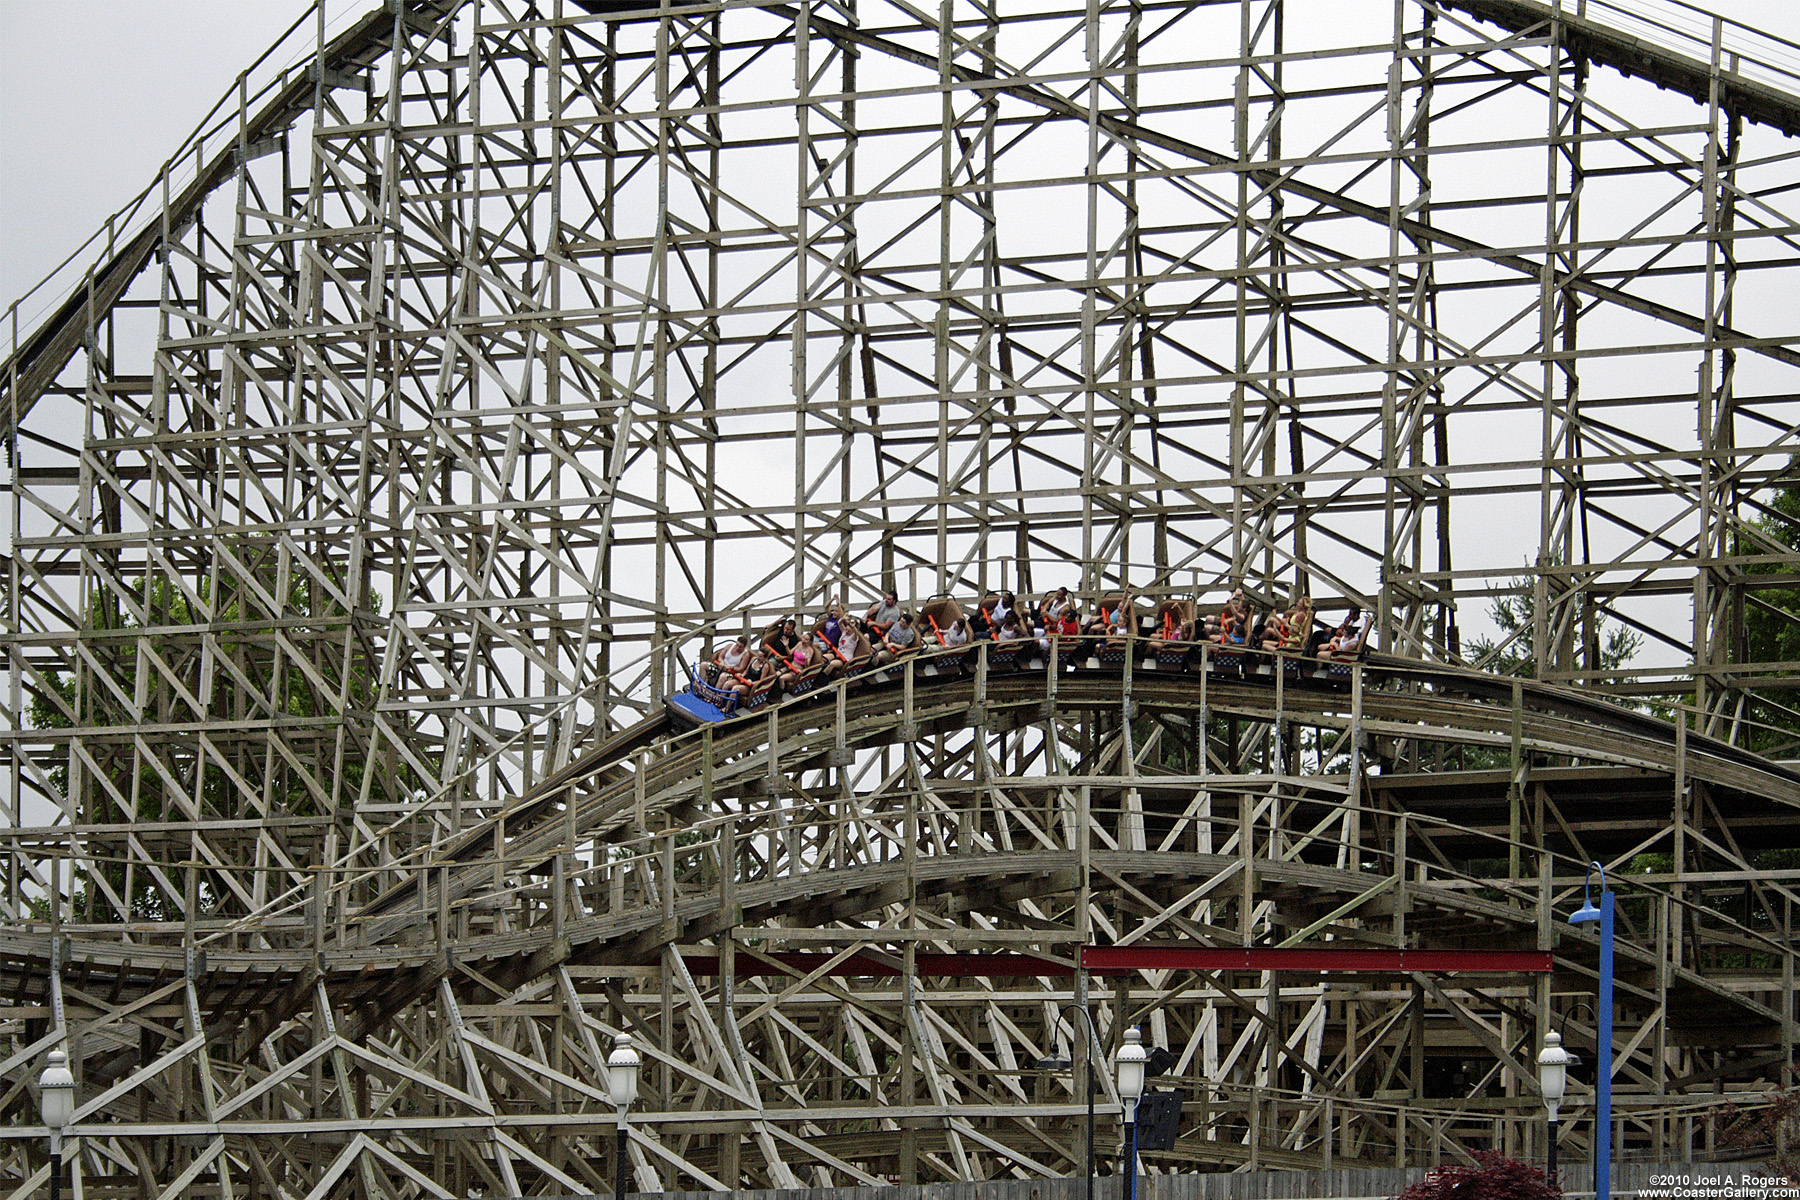 The Evel Knievel roller coaster in Six Flags St. Louis